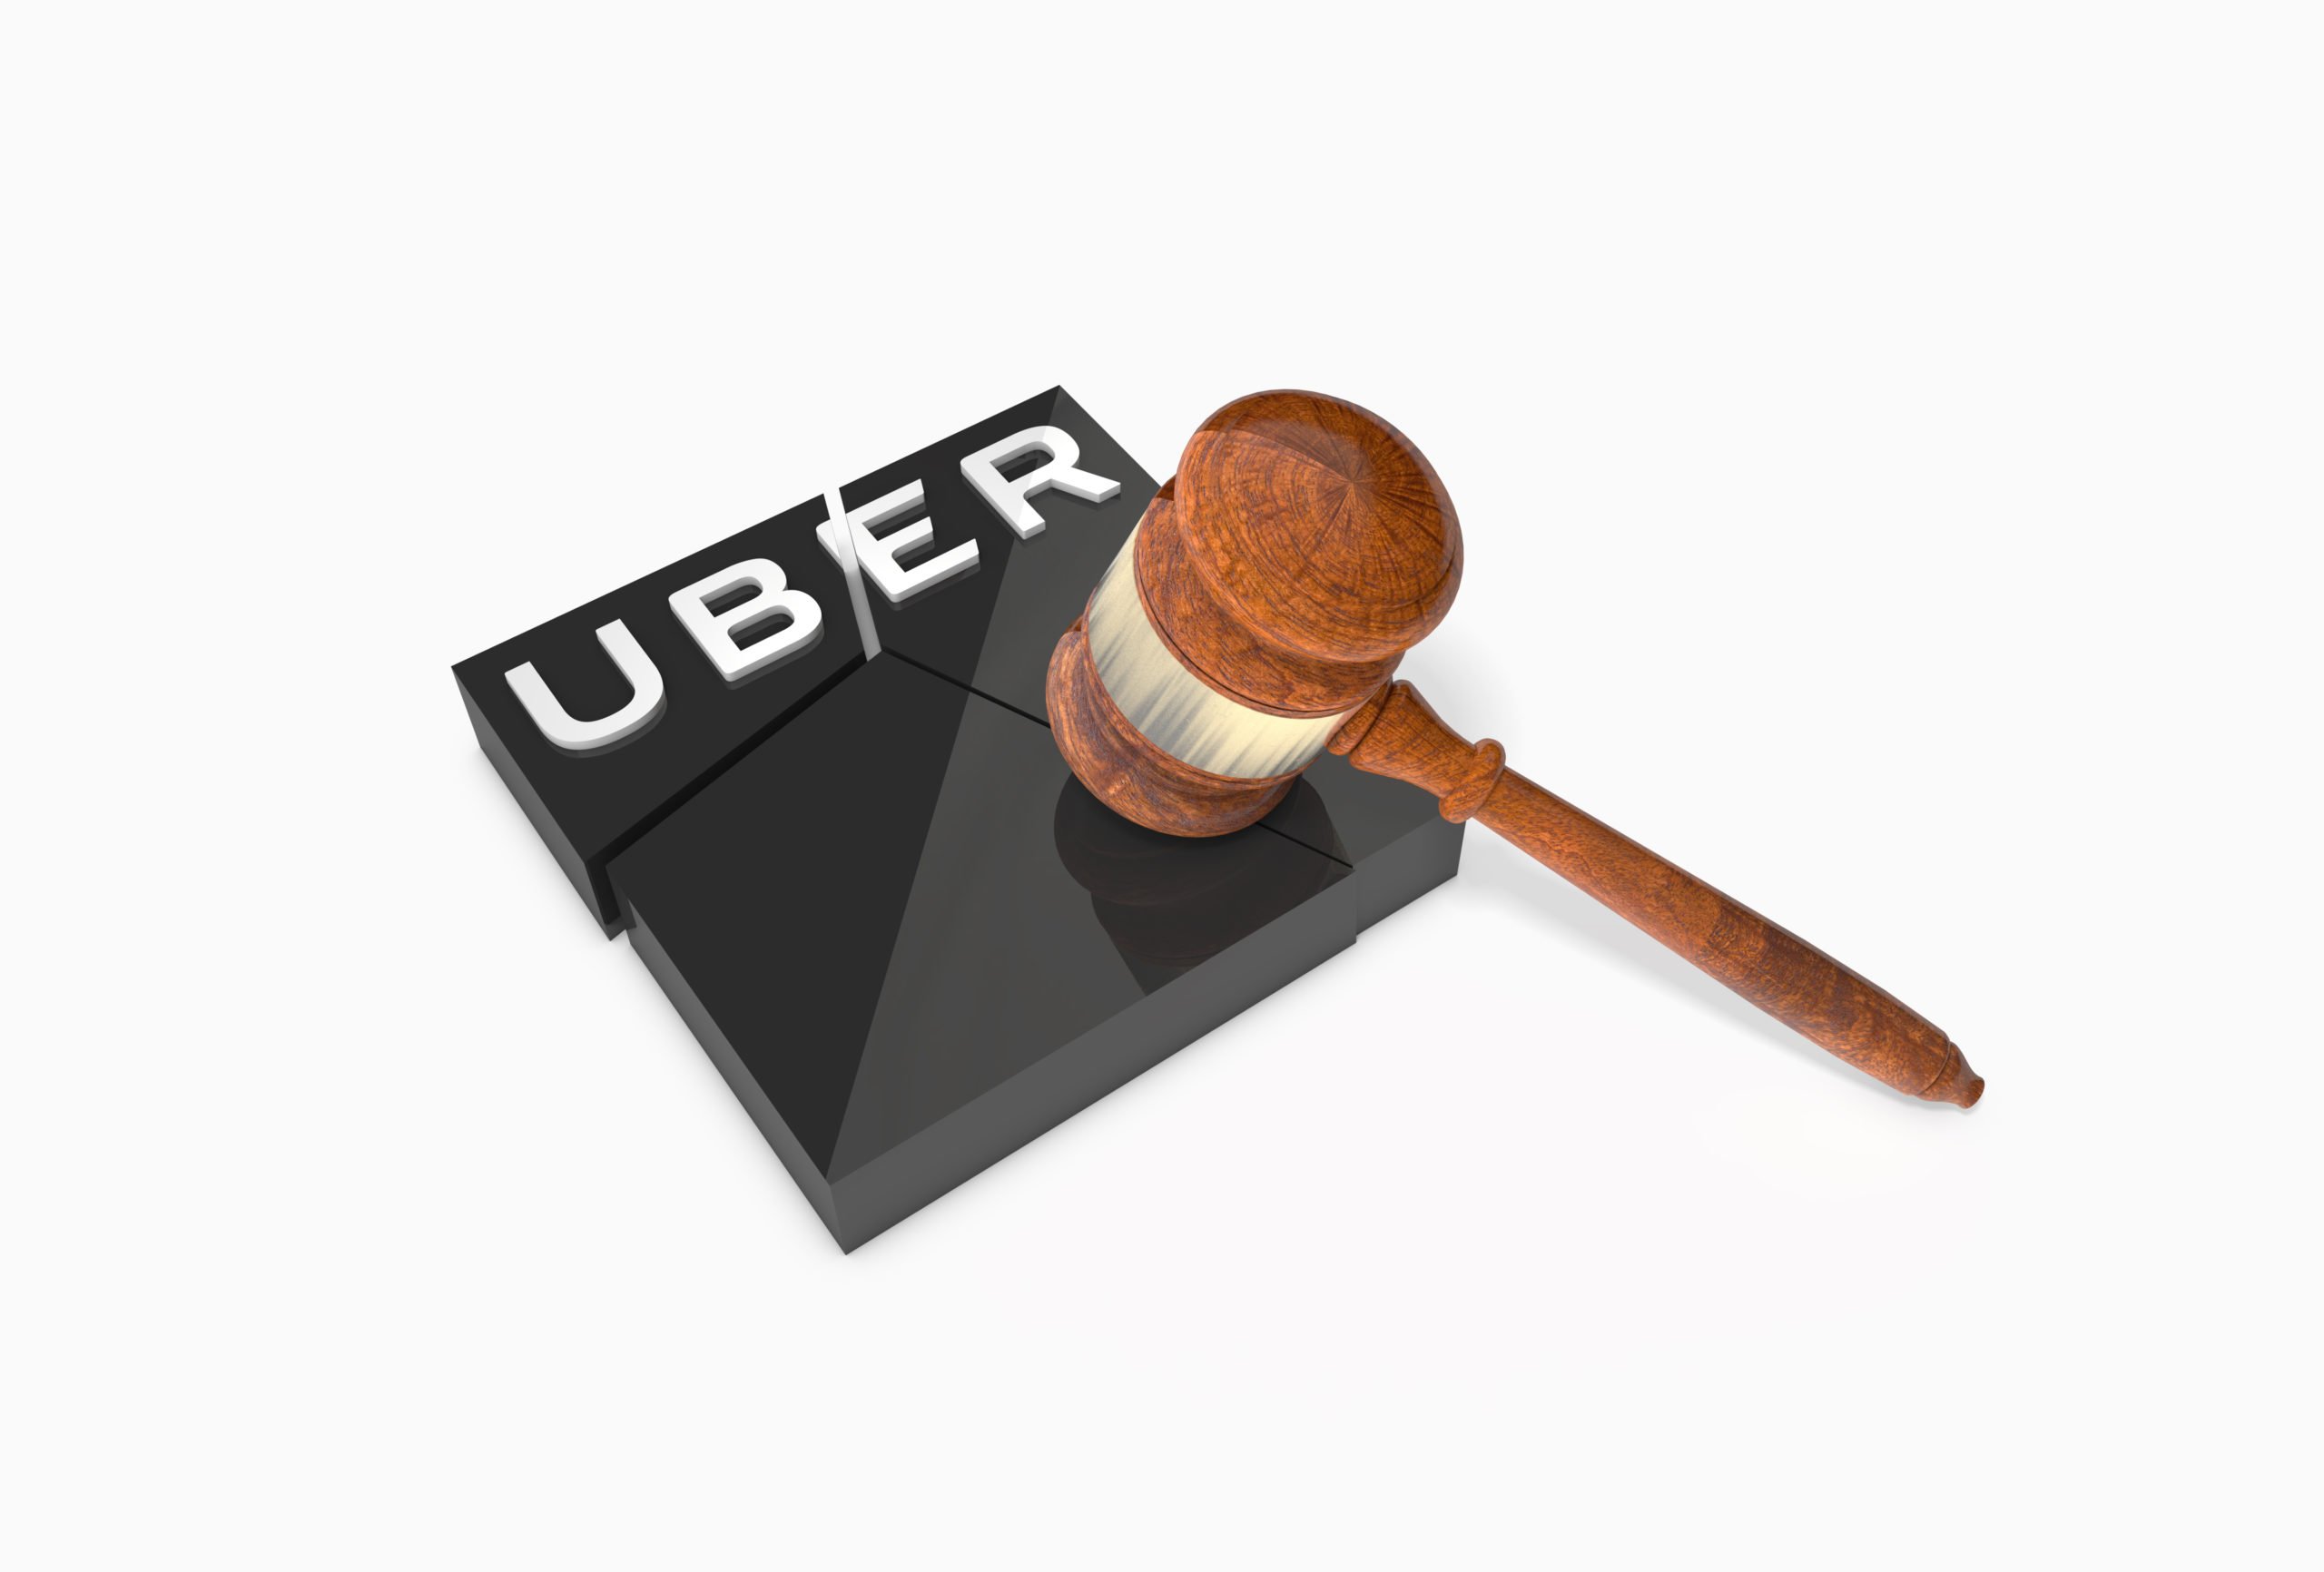 collapsed plate with Uber logo and a judge's gavel